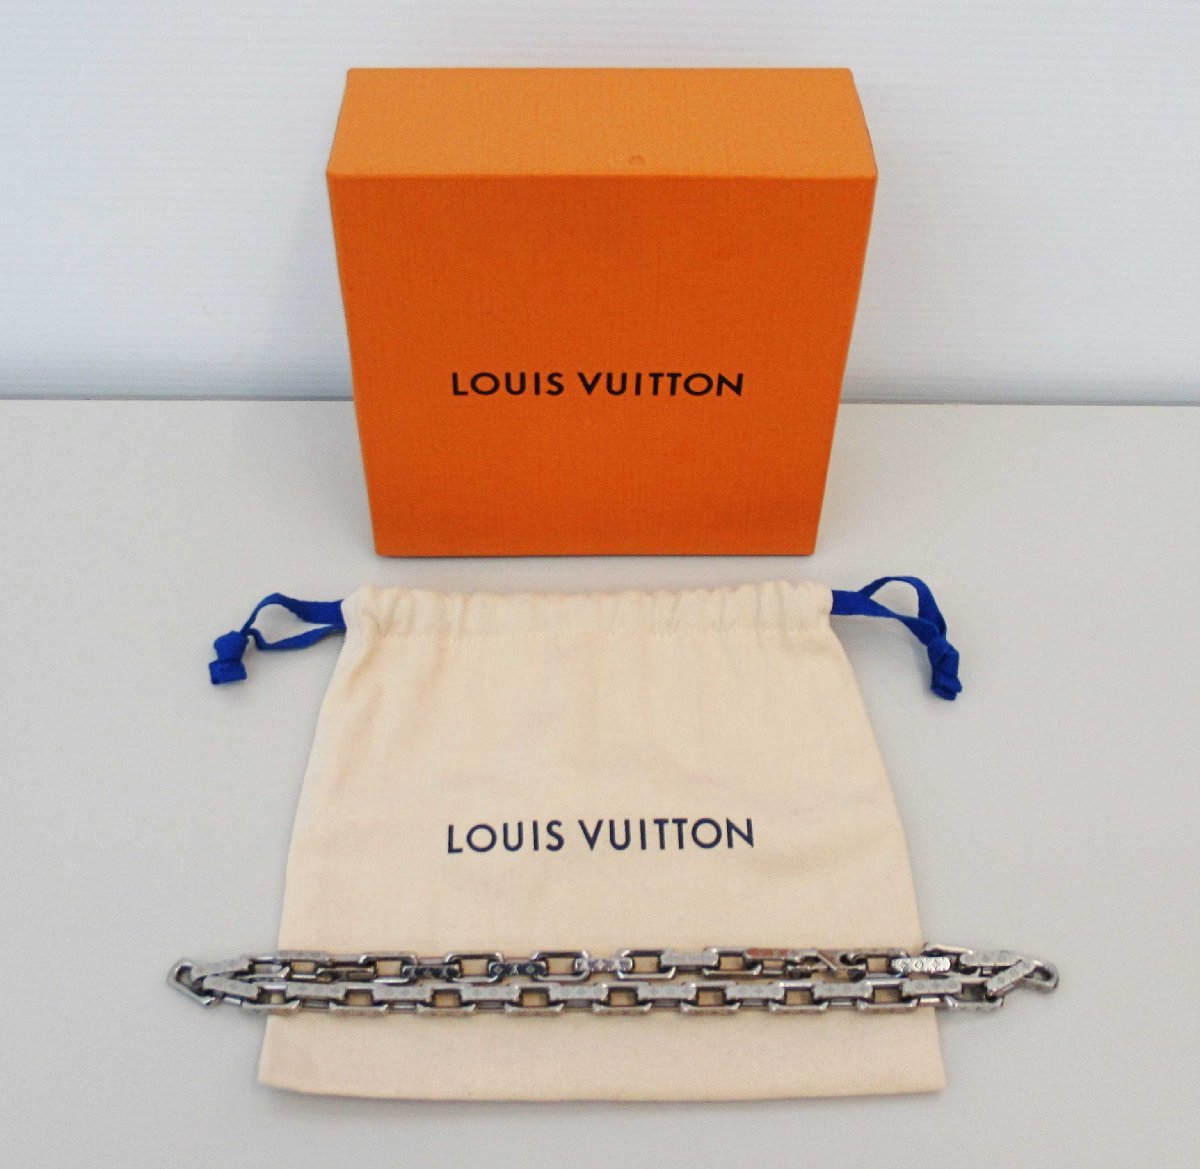 ☆LOUIS VUITTON ルイ・ヴィトン ネックレス・チェーン モノグラム コリエ チェーン M00307 LE0281の画像1